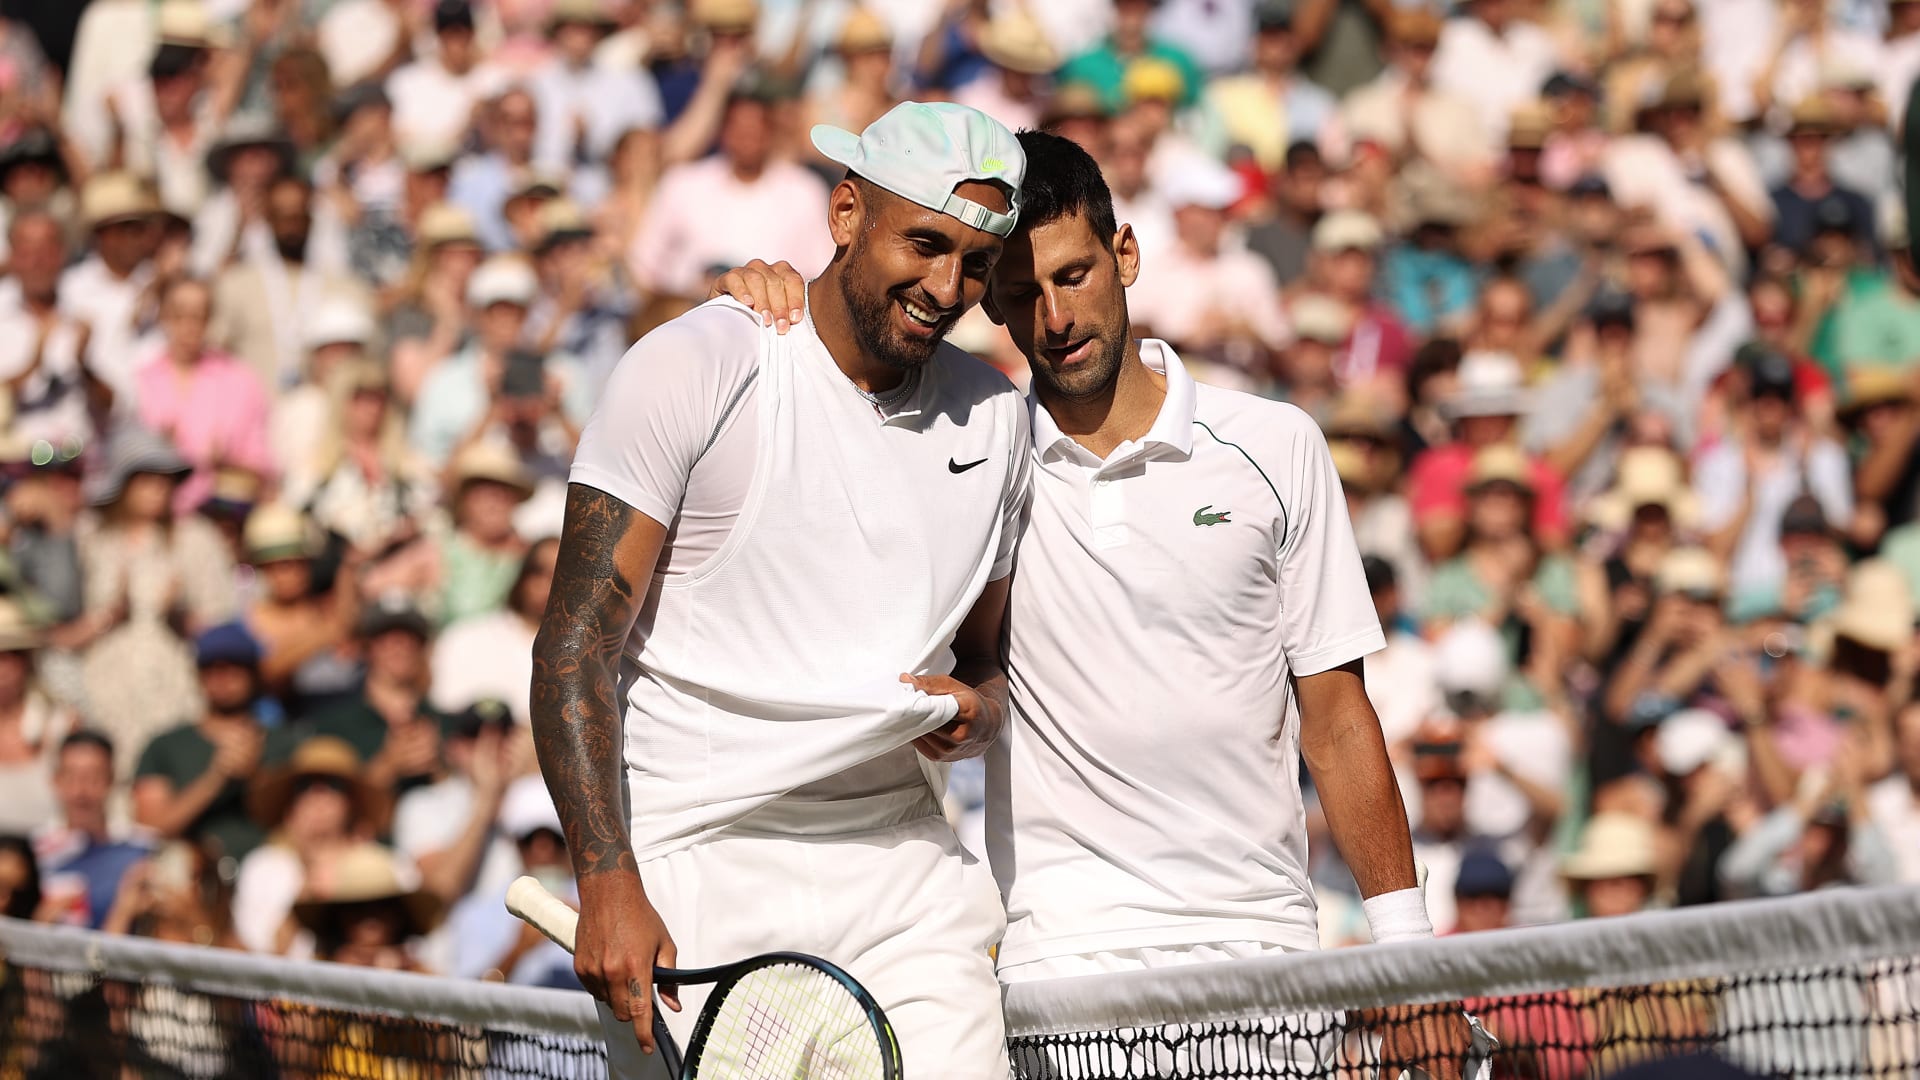 The “bromance” continues as Djokovic tells Kyrgios “Dinner is on me in NYC”